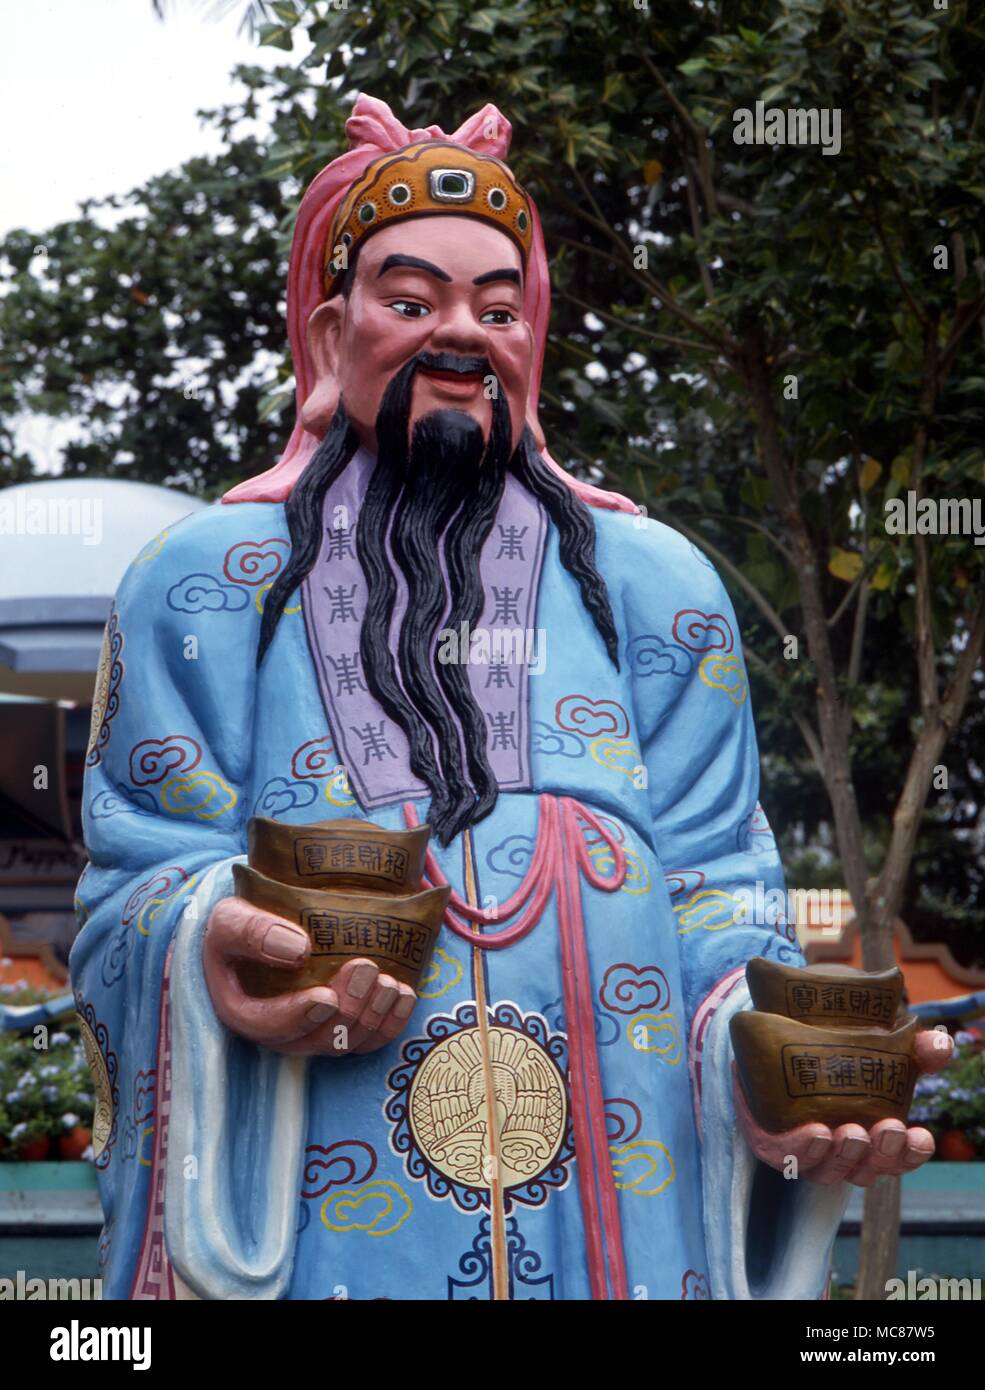 Chinese Mythology Lu Hsing the God of Salaries Statue in the Haw Par Villa Singapore Stock Photo